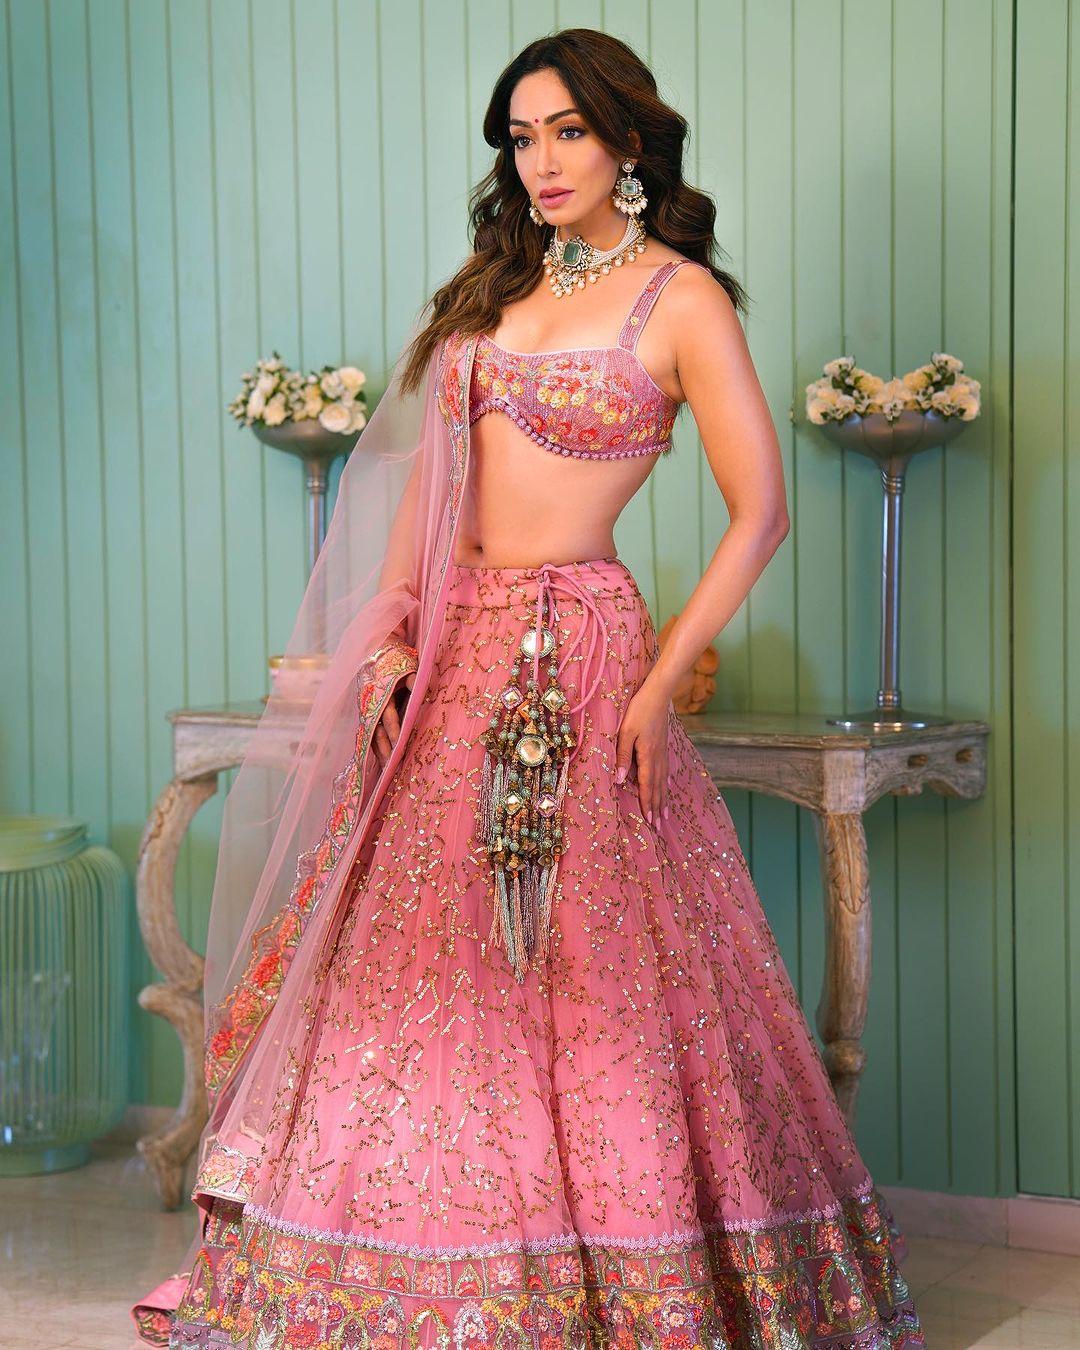 If you're in your Barbie era, this pink lehenga is perfect for you. Khushali shared beautiful pictures showcasing this stunning and grand outfit.